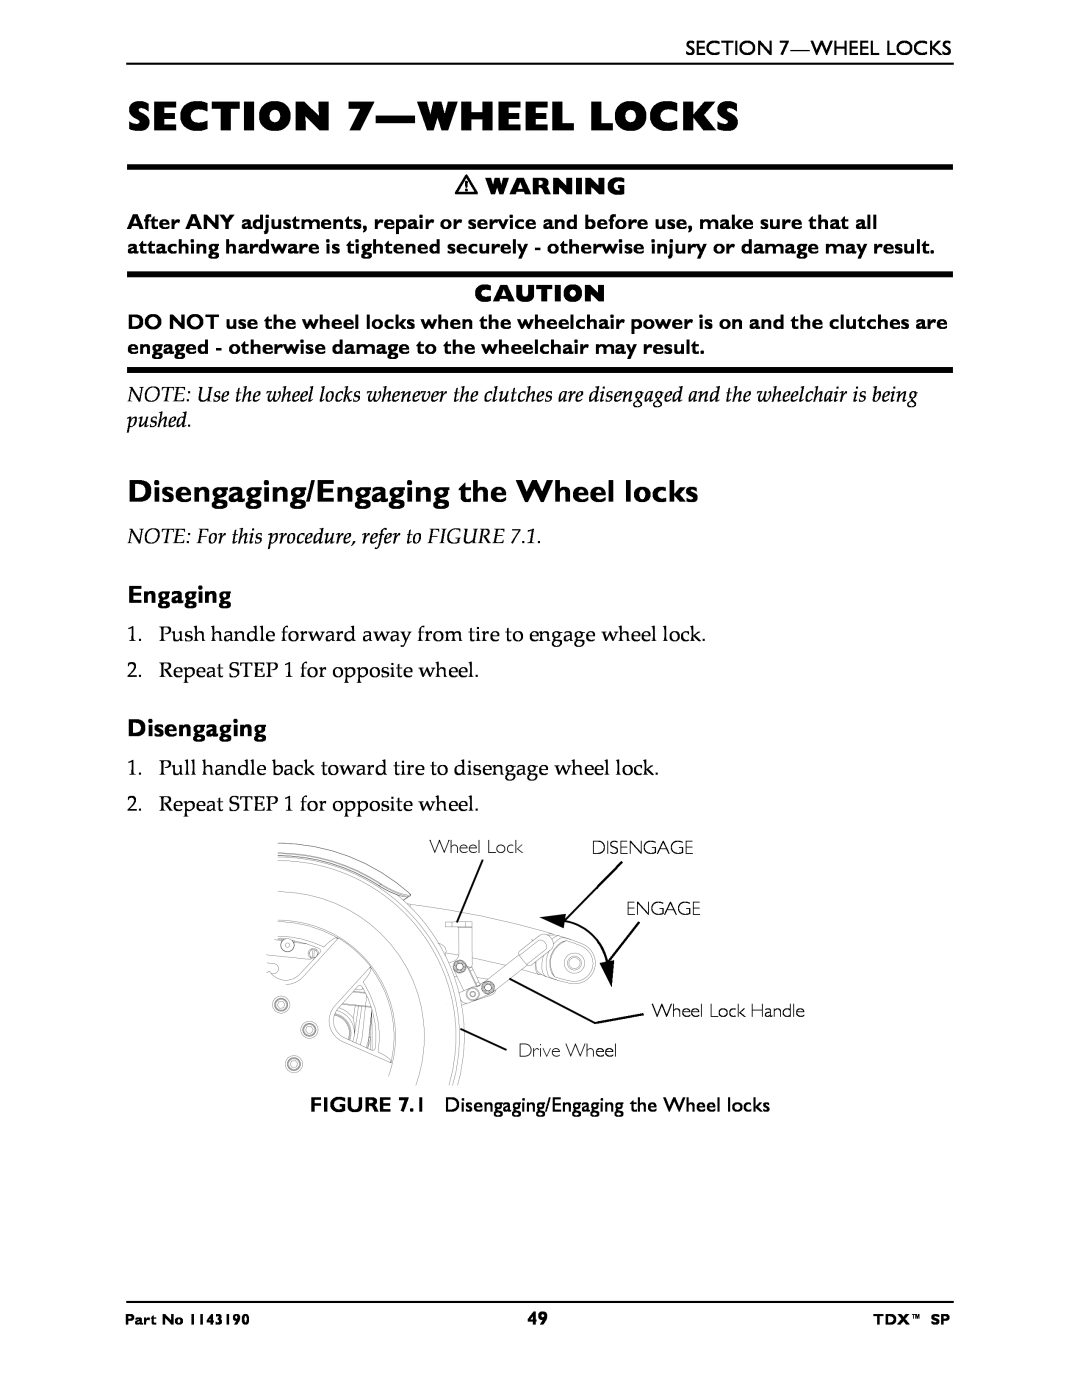 Invacare SP manual Wheel Locks, Disengaging/Engaging the Wheel locks, NOTE For this procedure, refer to FIGURE 